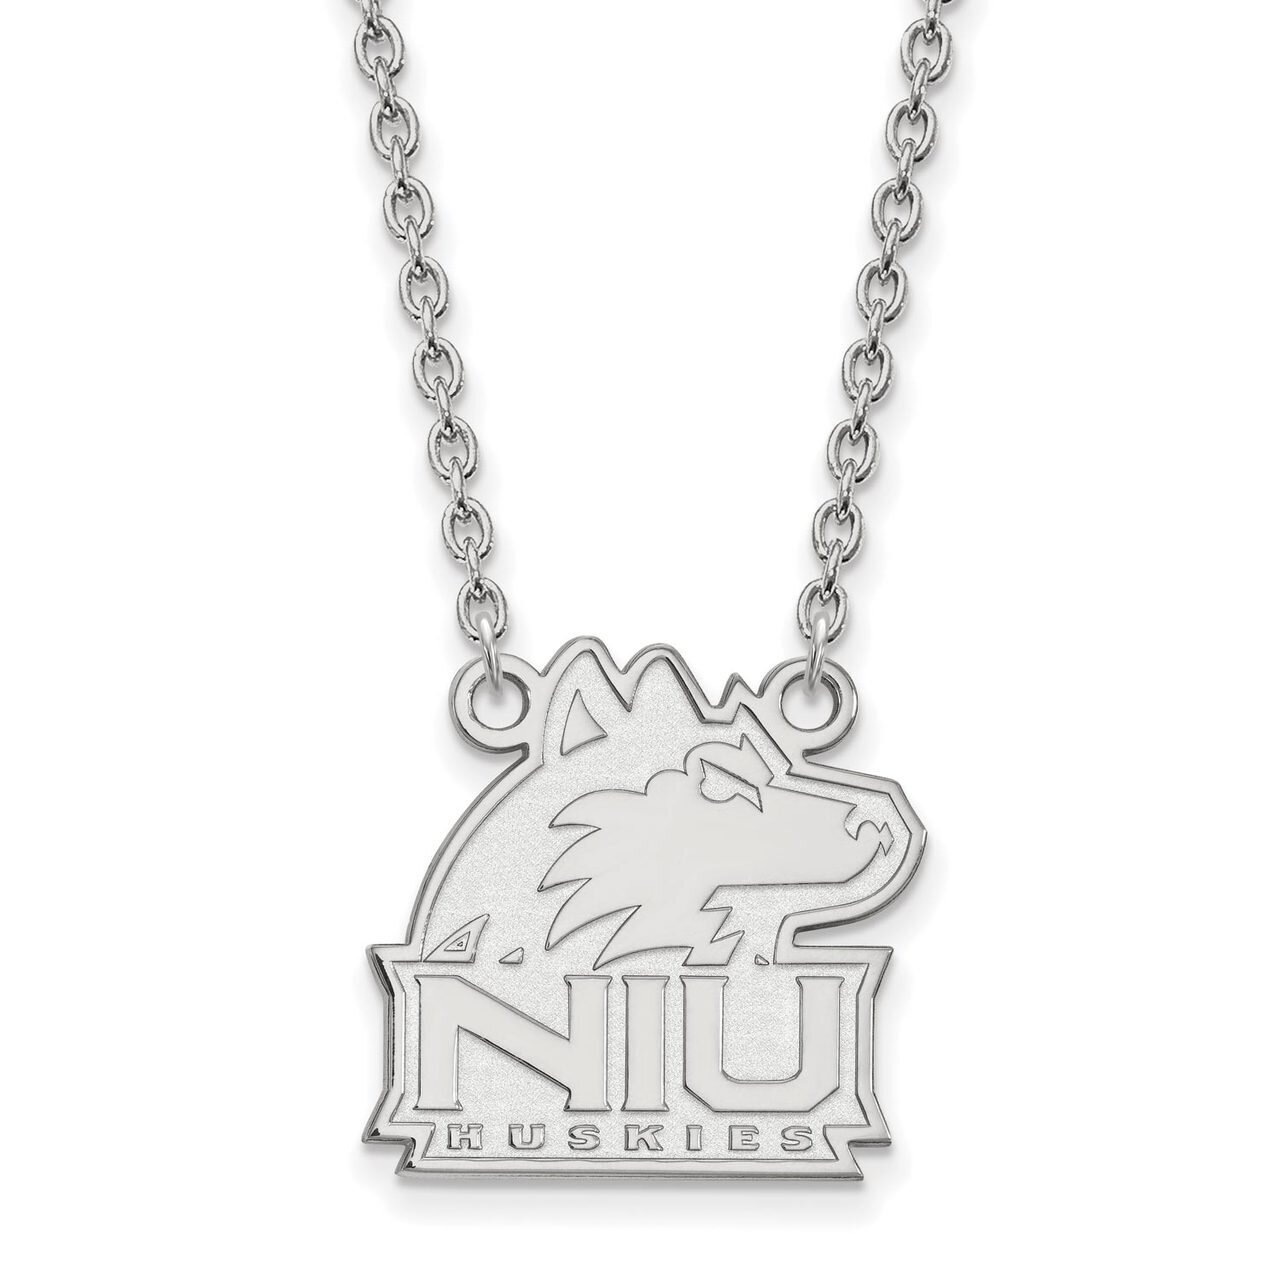 Northern Illinois University Large Pendant with Chain Necklace 10k White Gold 1W012NIU-18